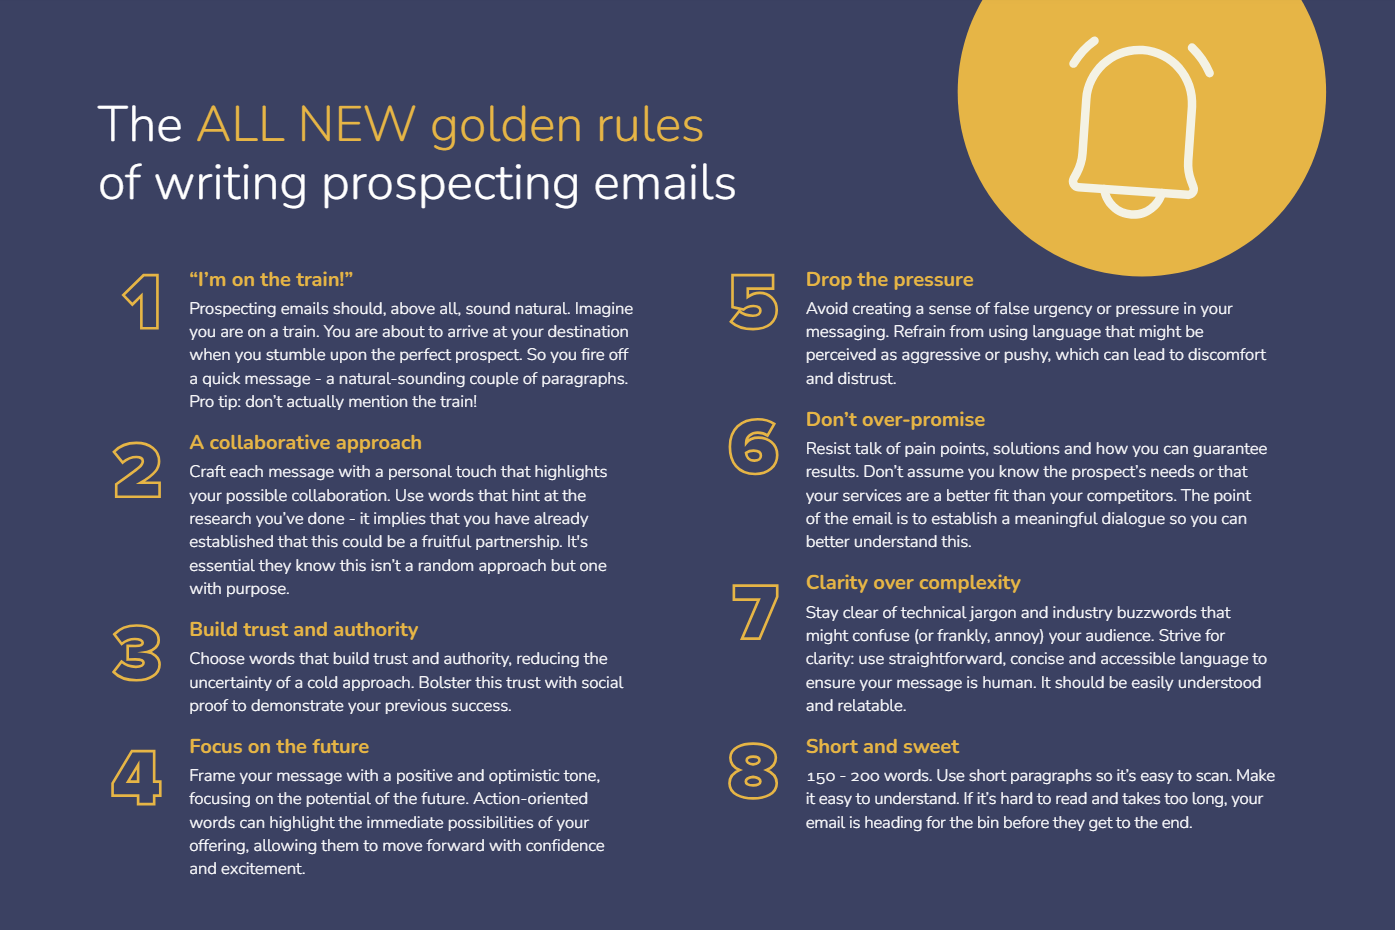 Our golden rules to email outreach